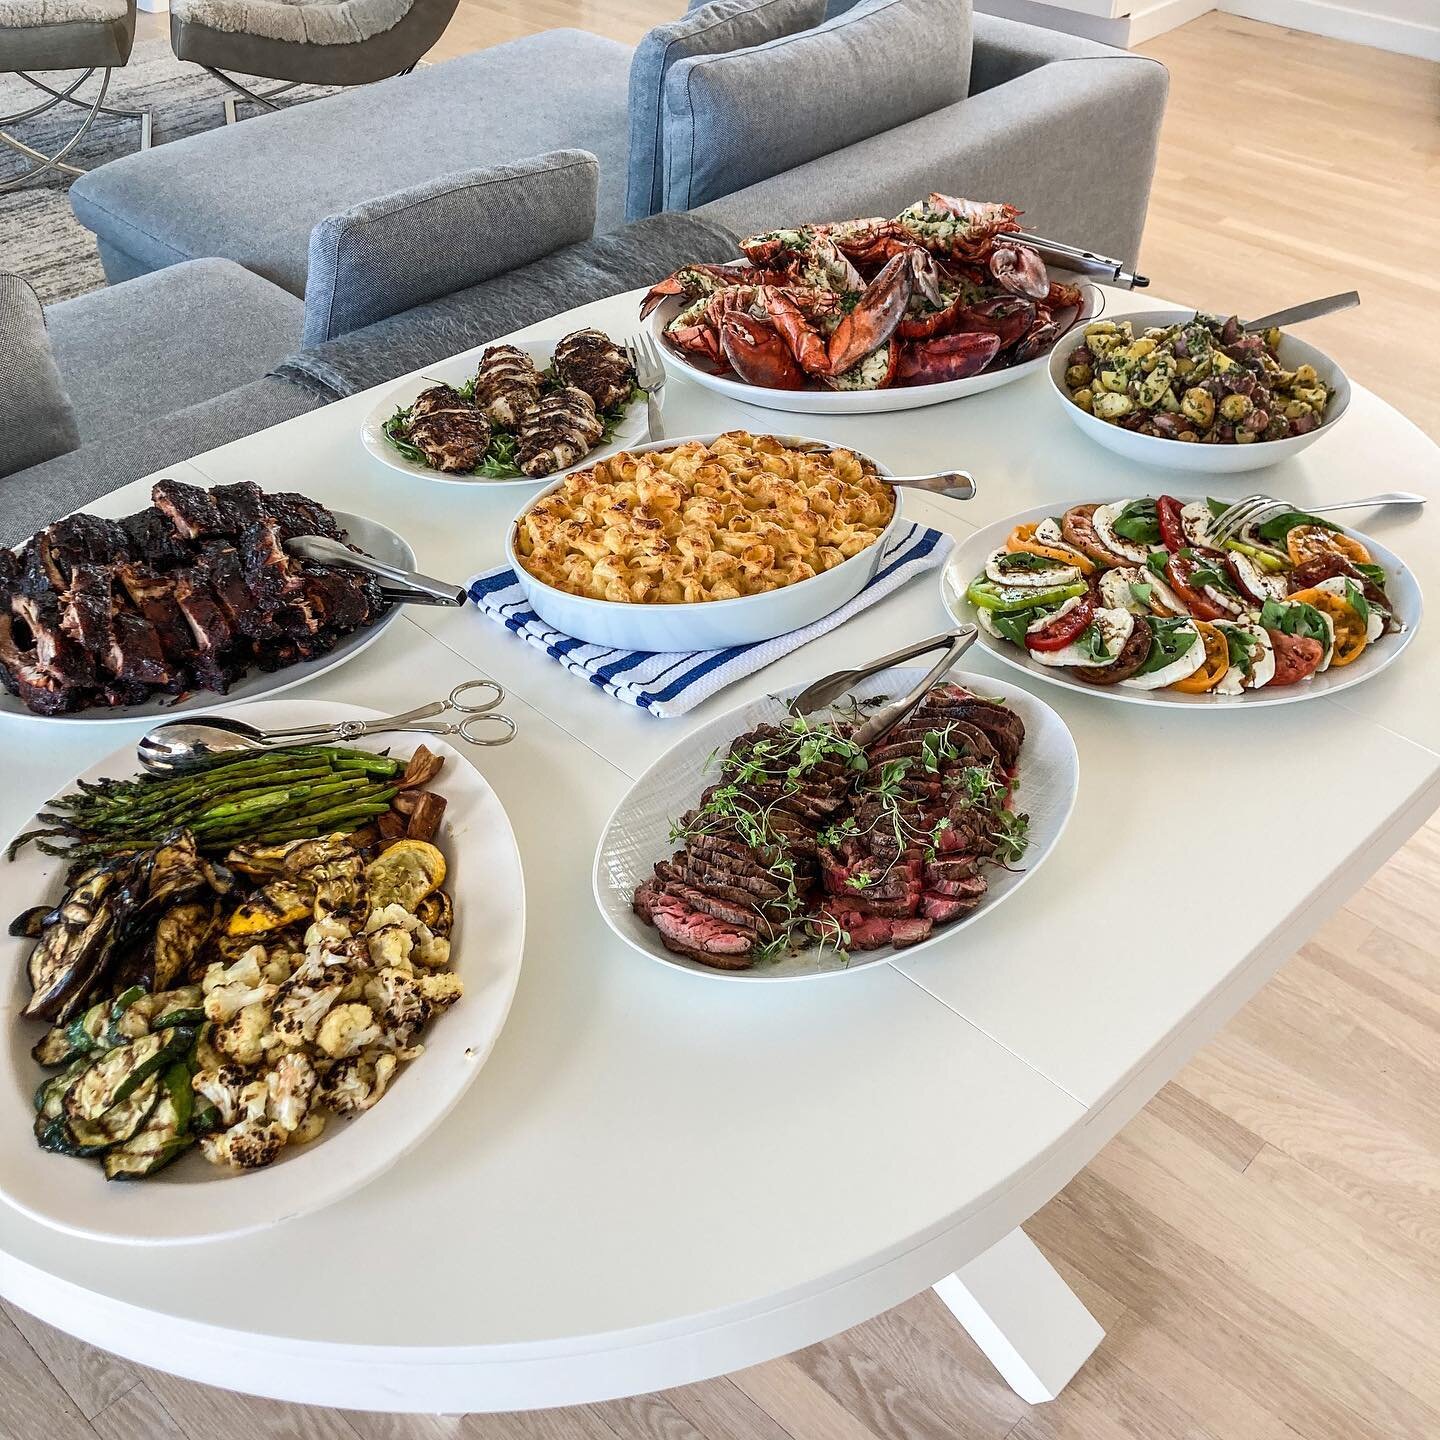 Missing our summer #BBQ spreads. This bountiful feast was made by one of our wonderful chefs, @chefsamralbovsky 

#privatechef #cheflife #foodie #chef #food #catering #personalchef #instafood #chefsofinstagram #foodstagram #foodporn #foodphotography 